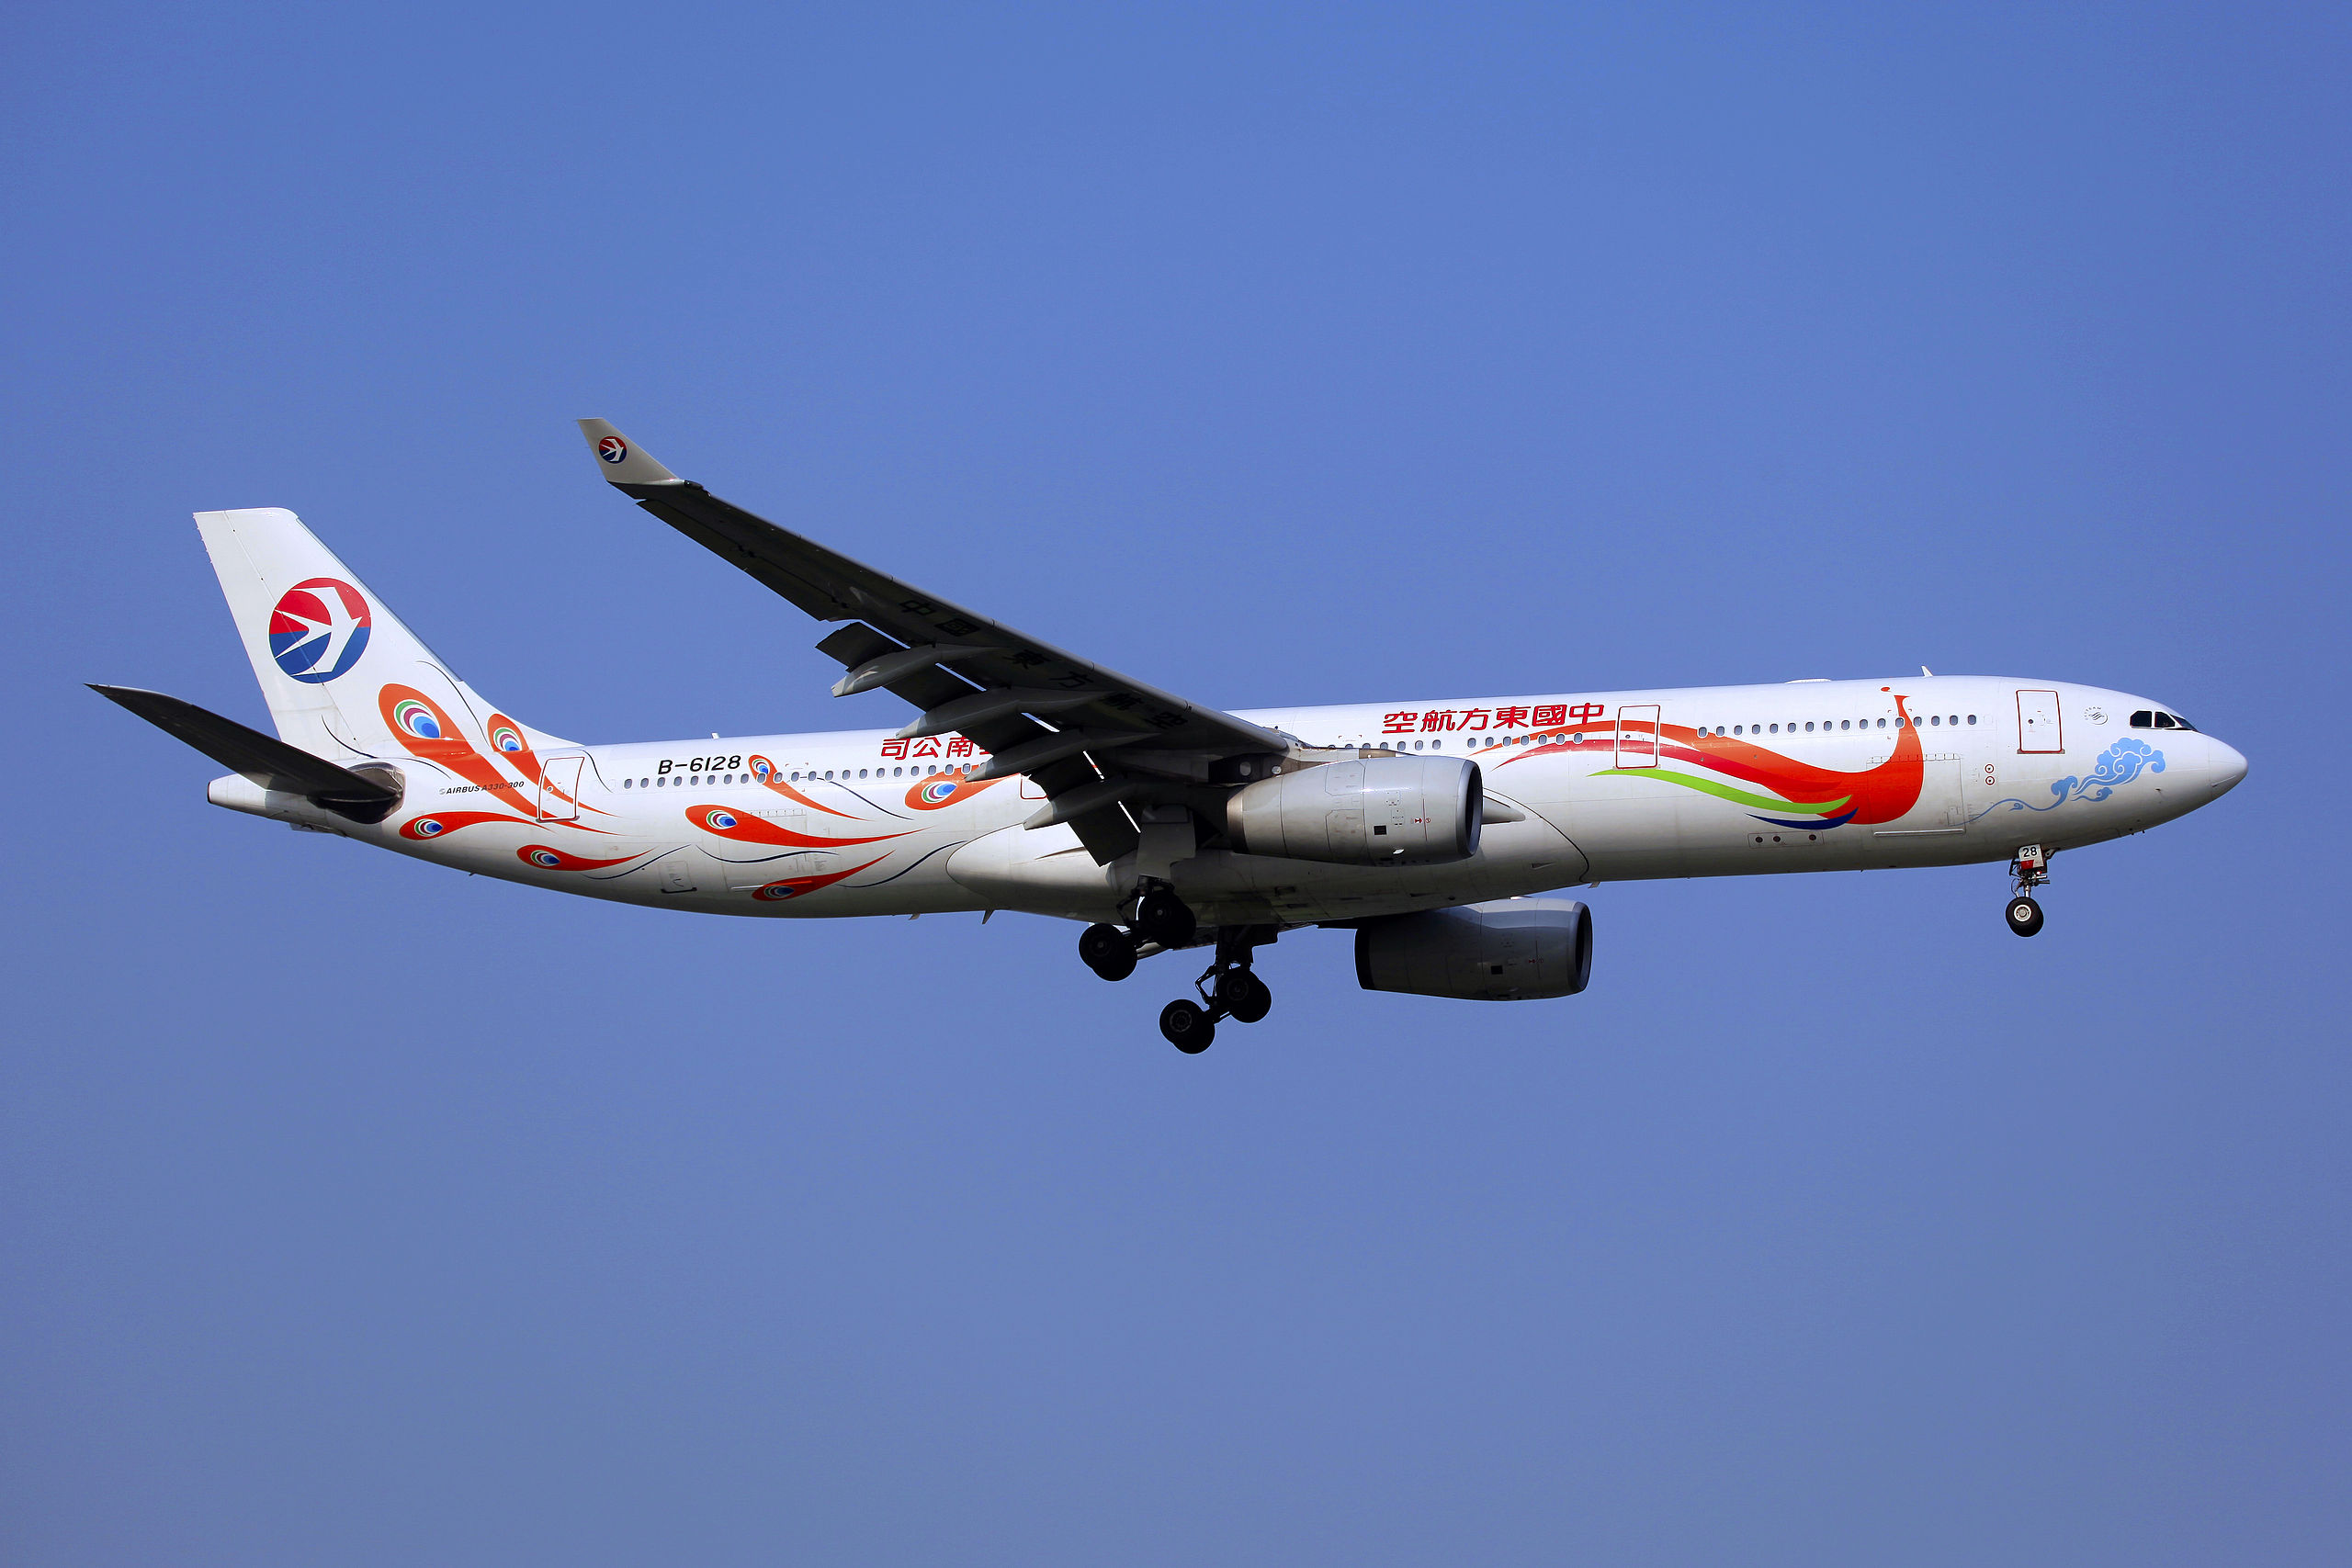 File:B-6128 - China Eastern Airlines - Airbus A330-343X - Yunnan 